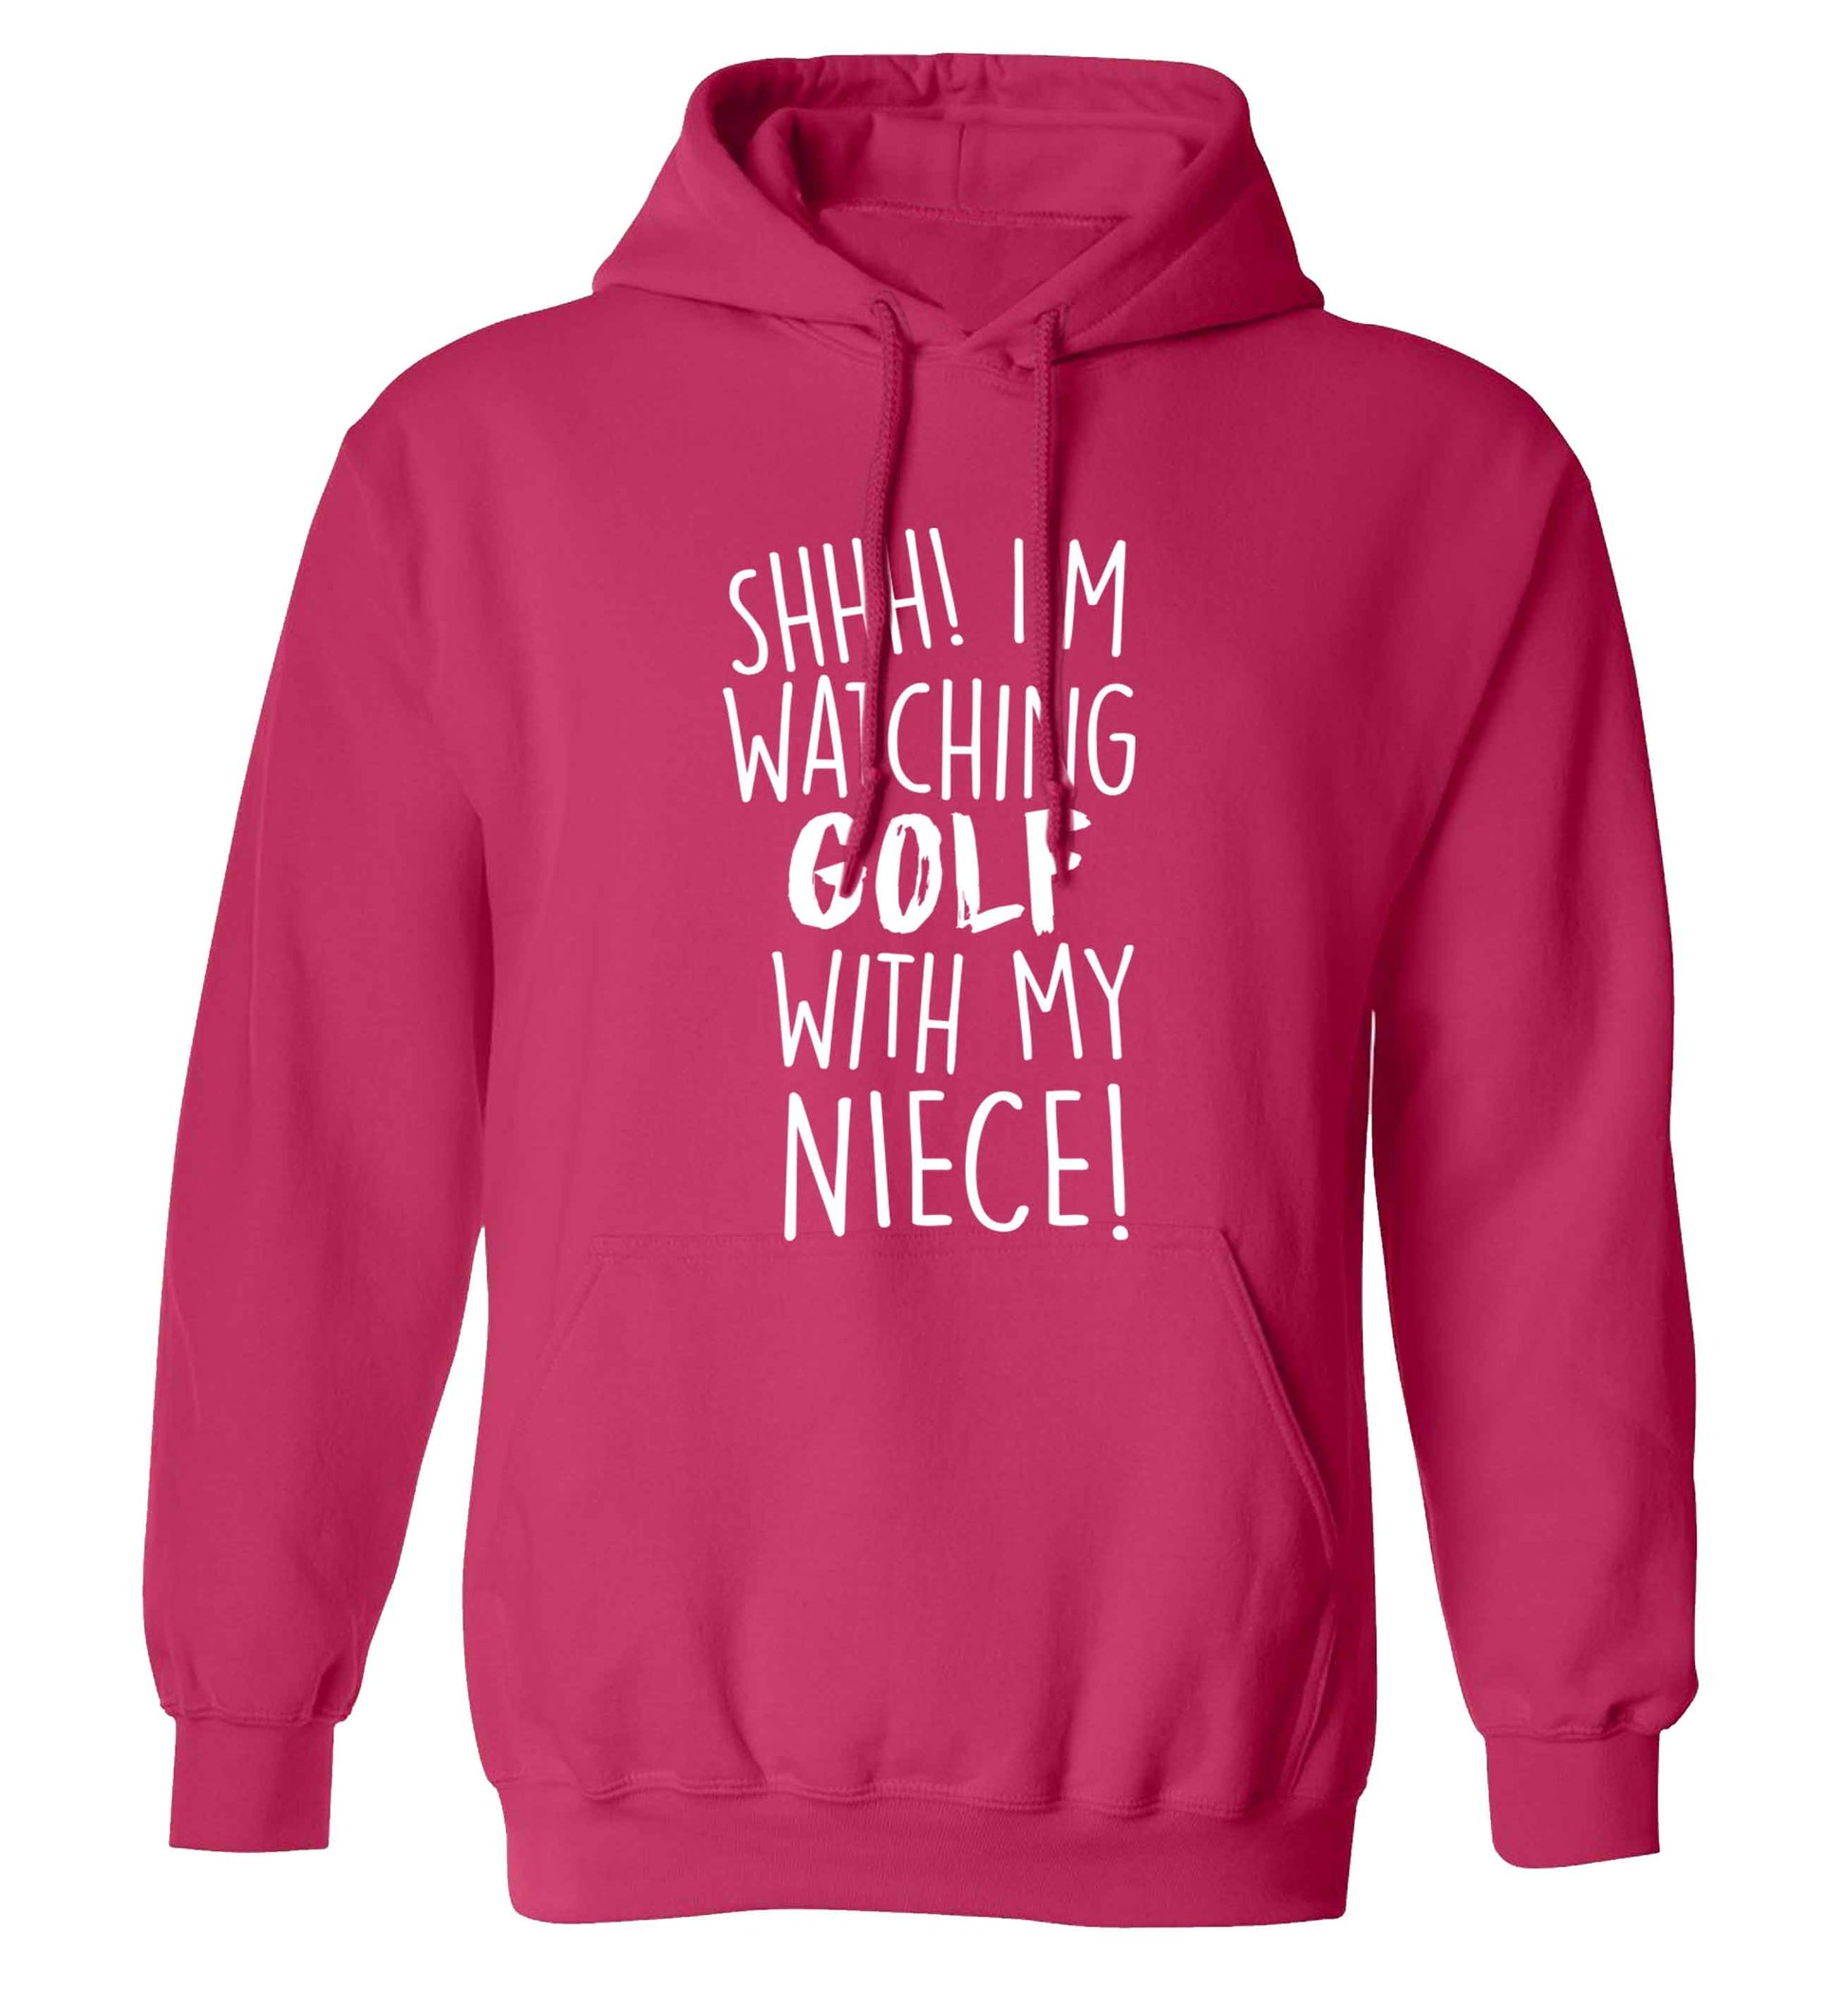 Shh I'm watching golf with my niece adults unisex pink hoodie 2XL